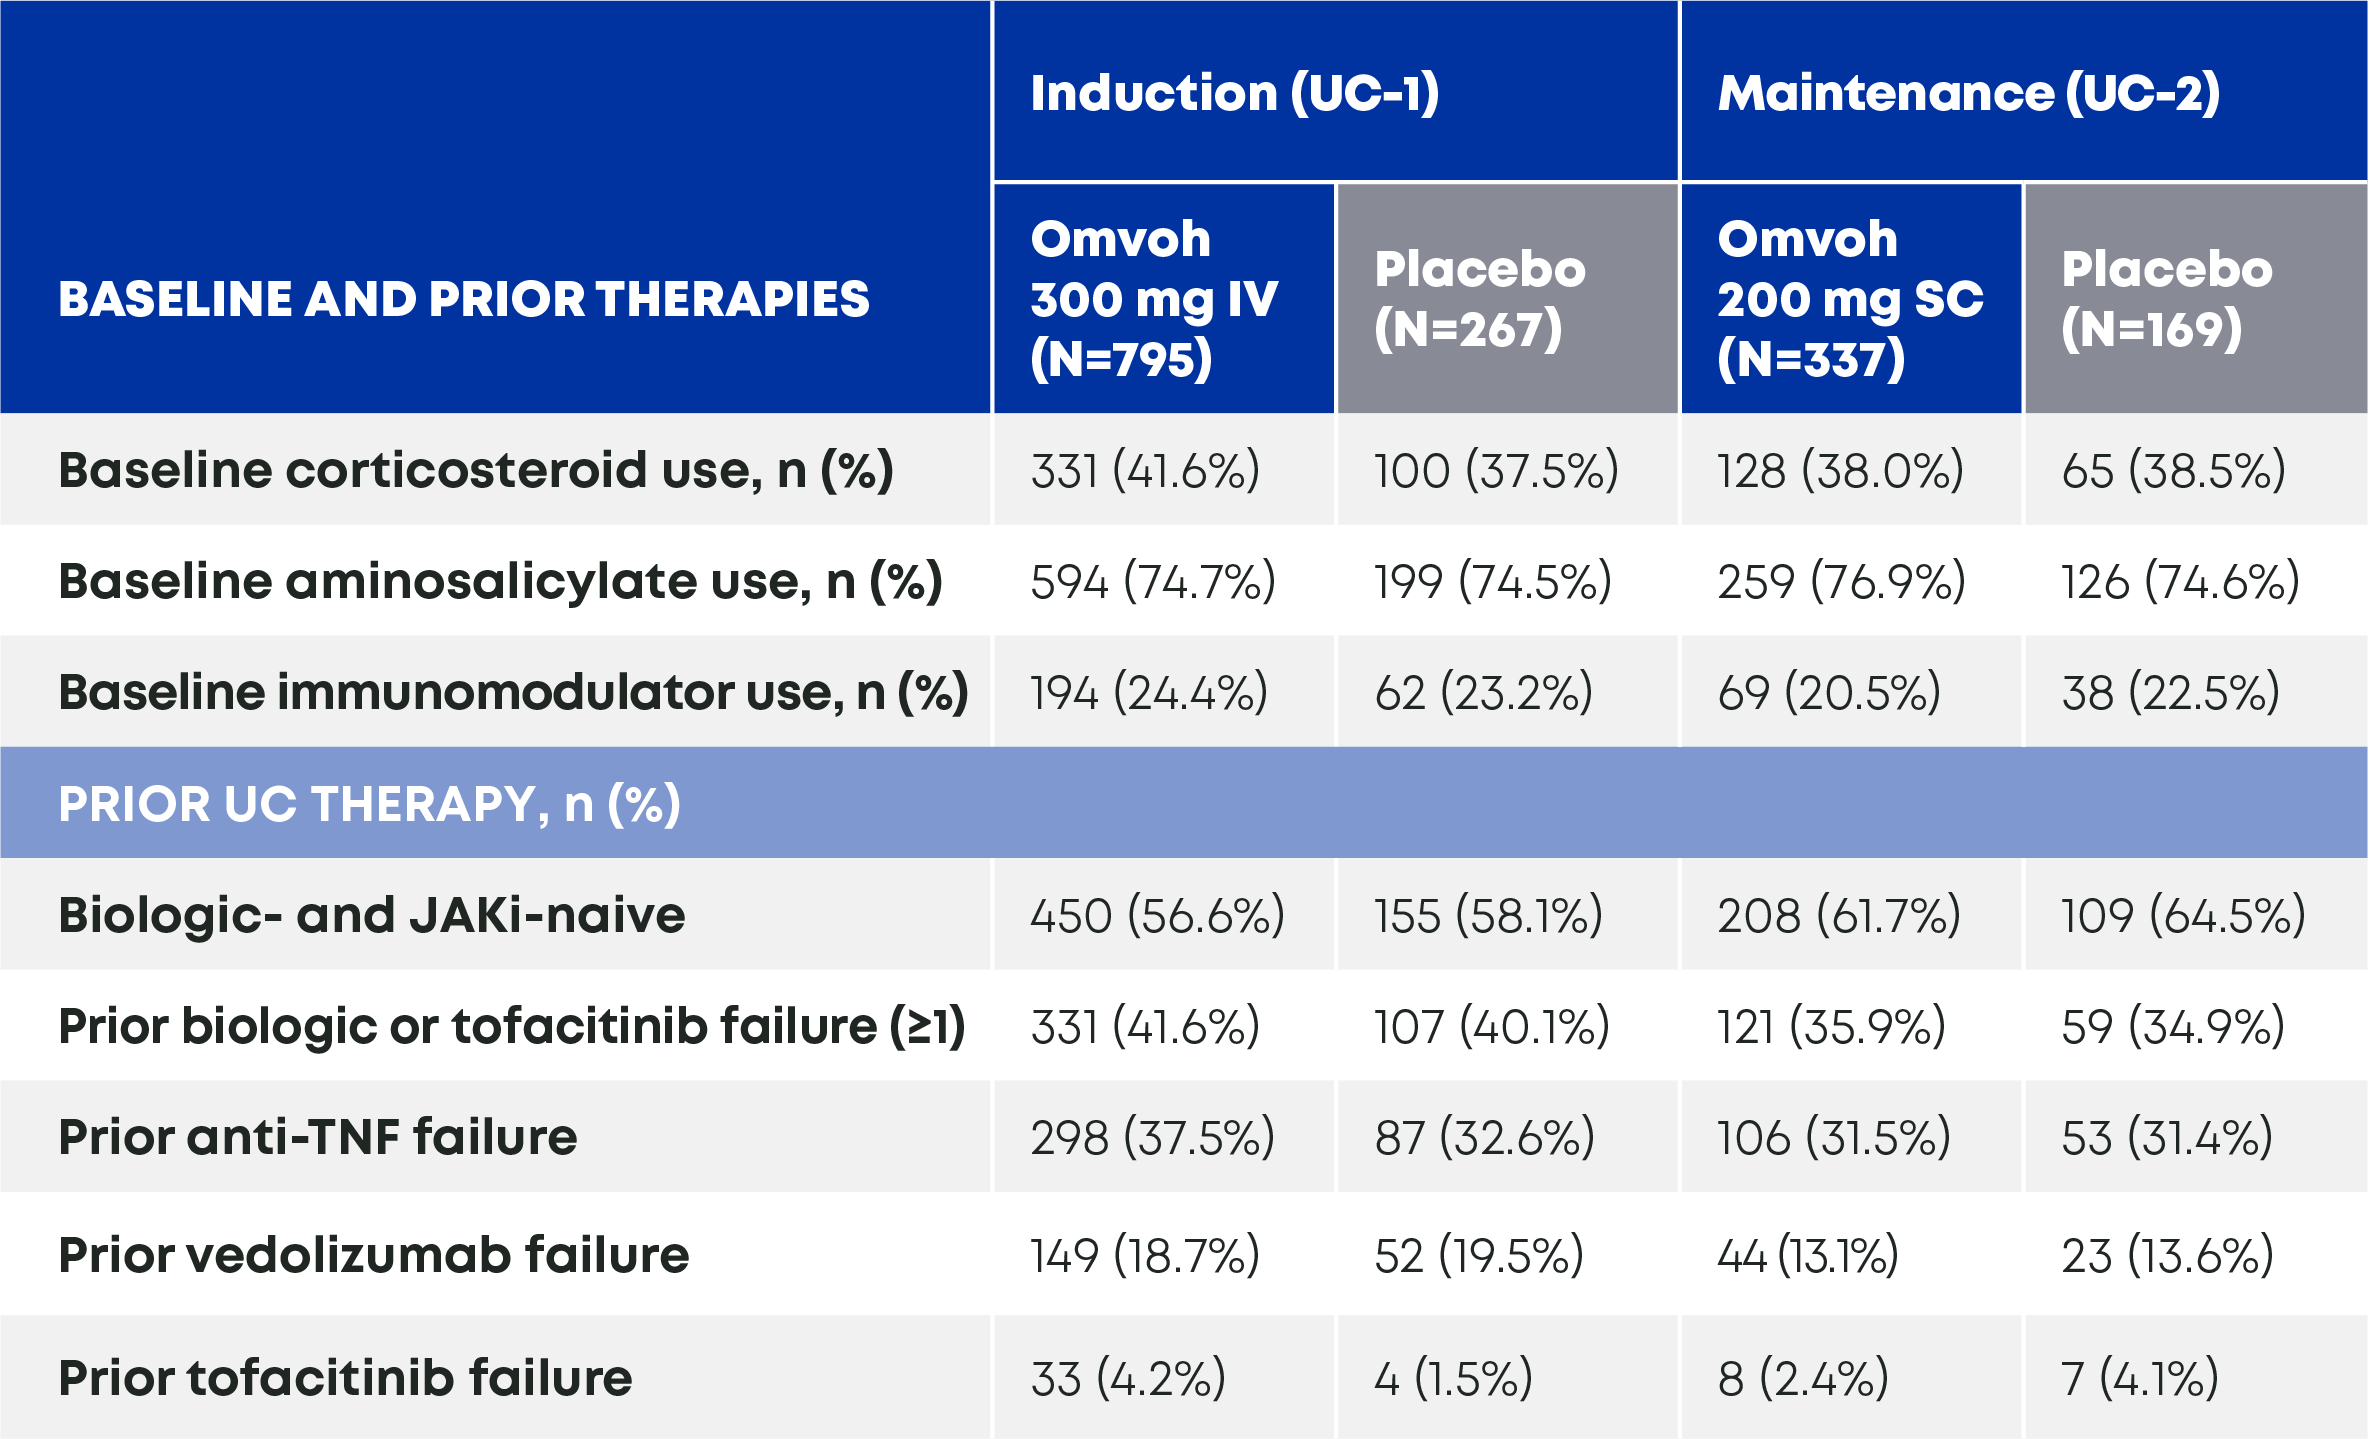 Baseline of prior therapies for Omvoh